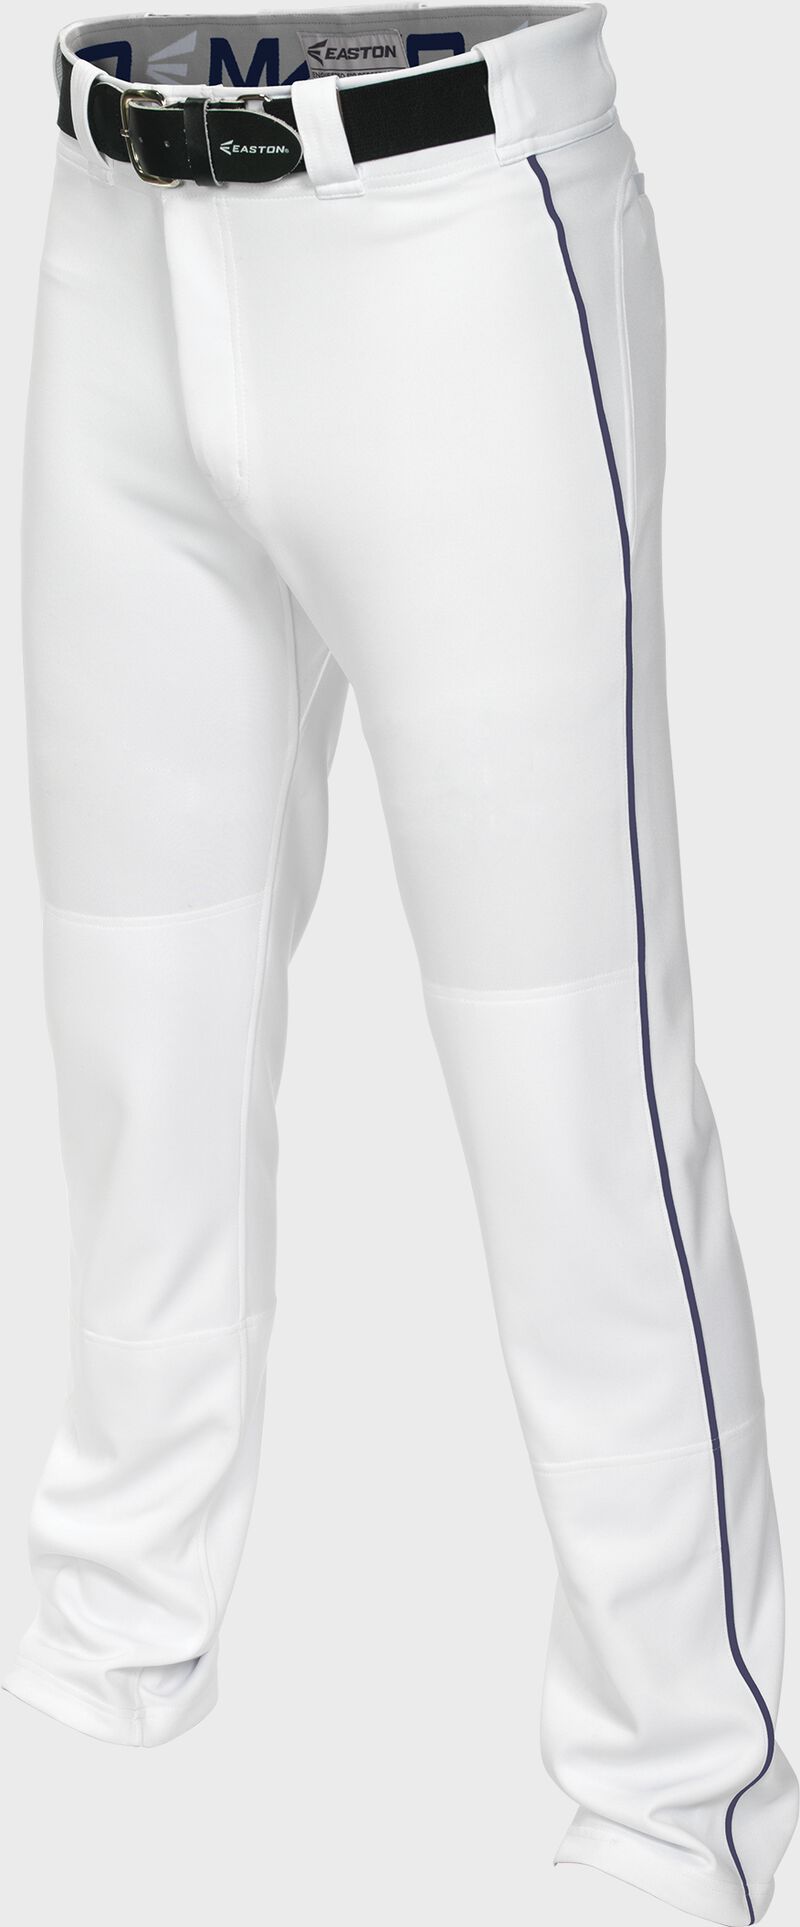 Mako 2 Pant Adult Piped WHITE/NAVY  XL